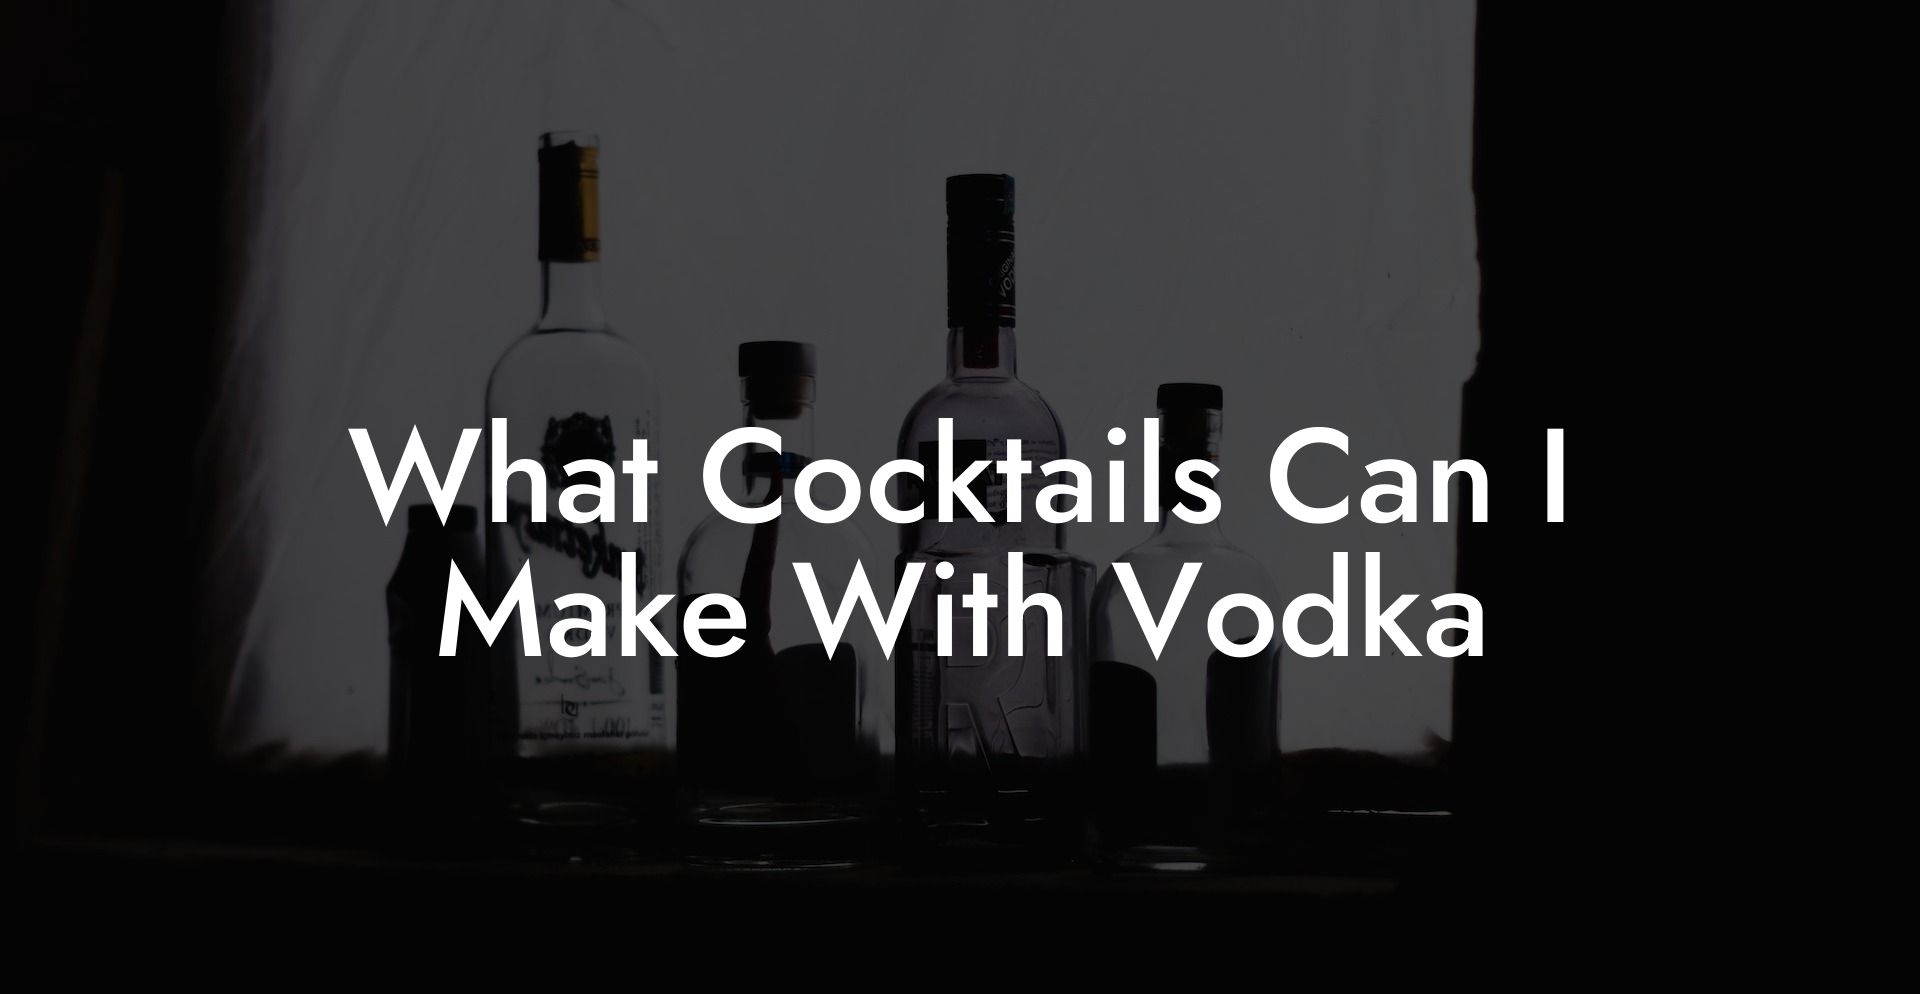 What Cocktails Can I Make With Vodka